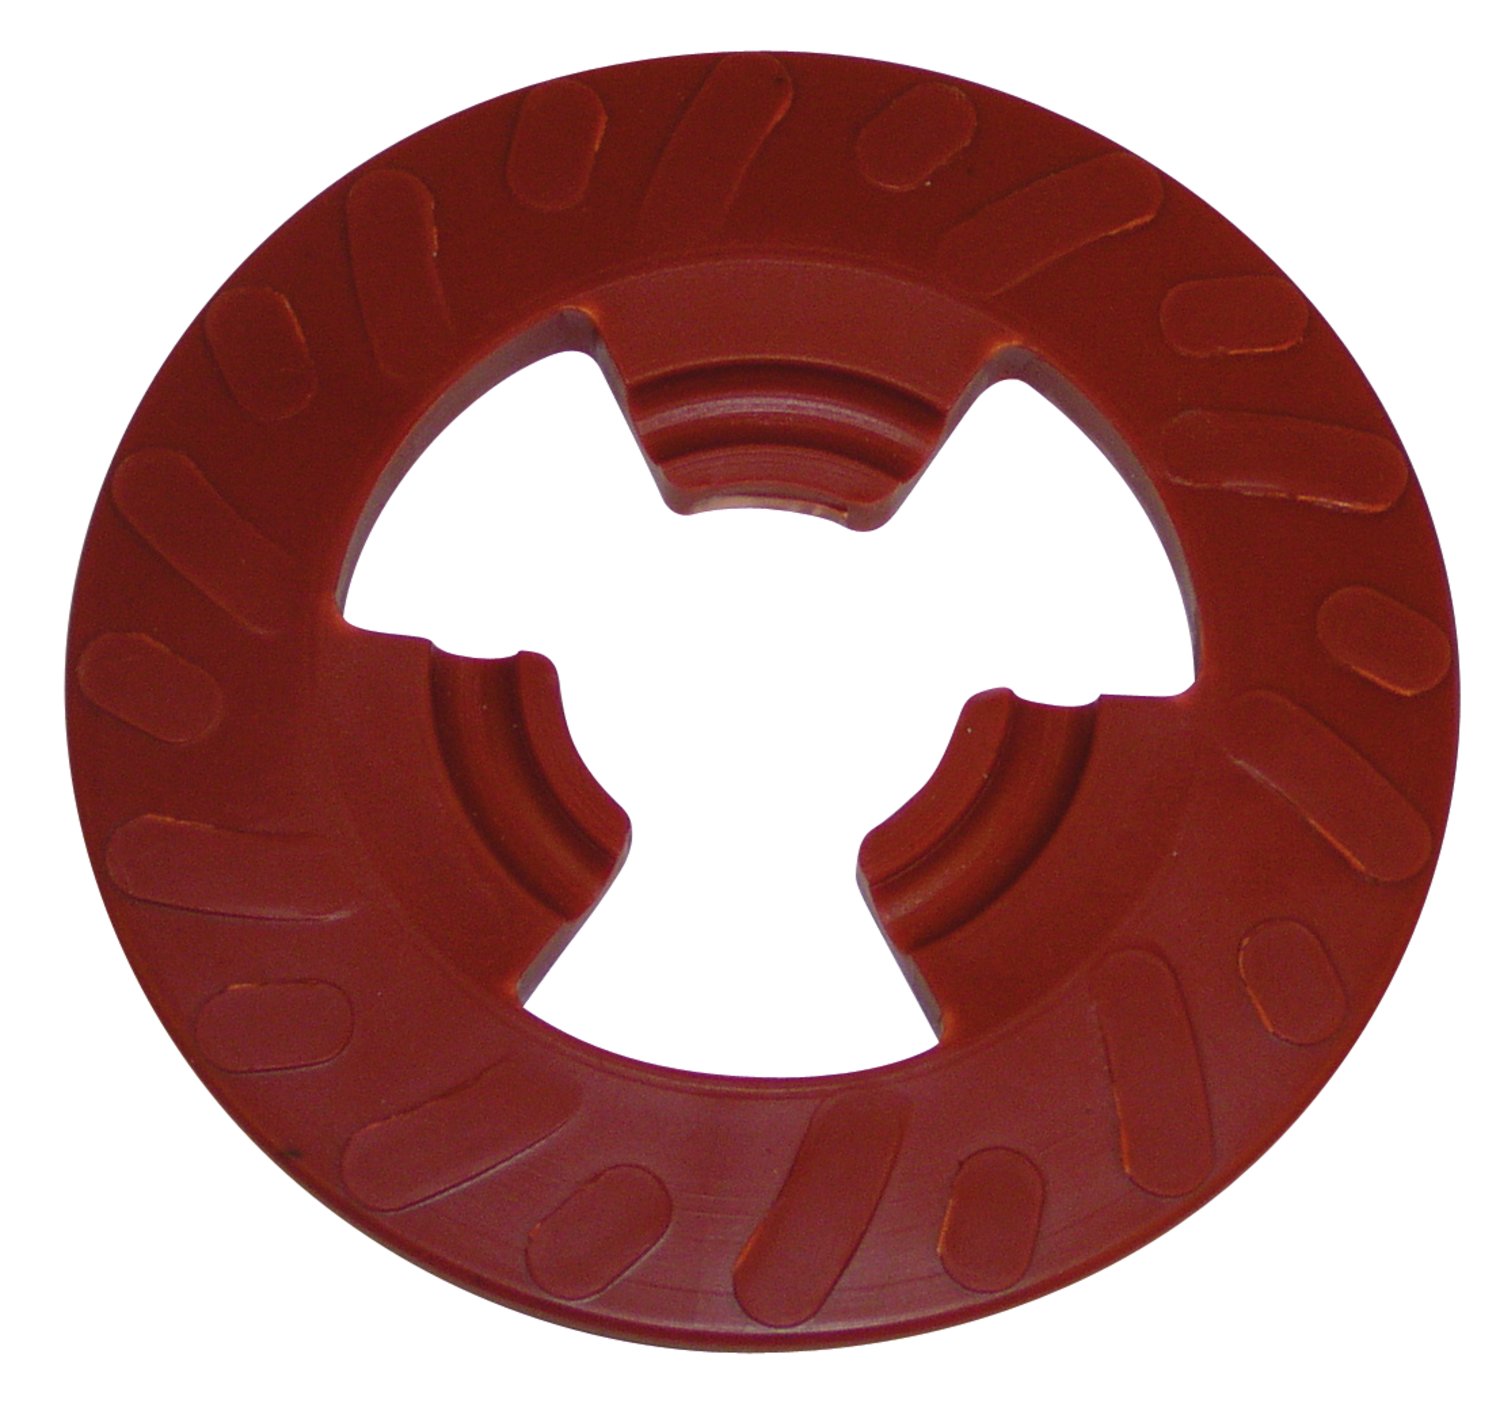 7010326835 - 3M Disc Pad Face Plate Ribbed 28656, 4 in, Extra Hard Red, 10 ea/Case